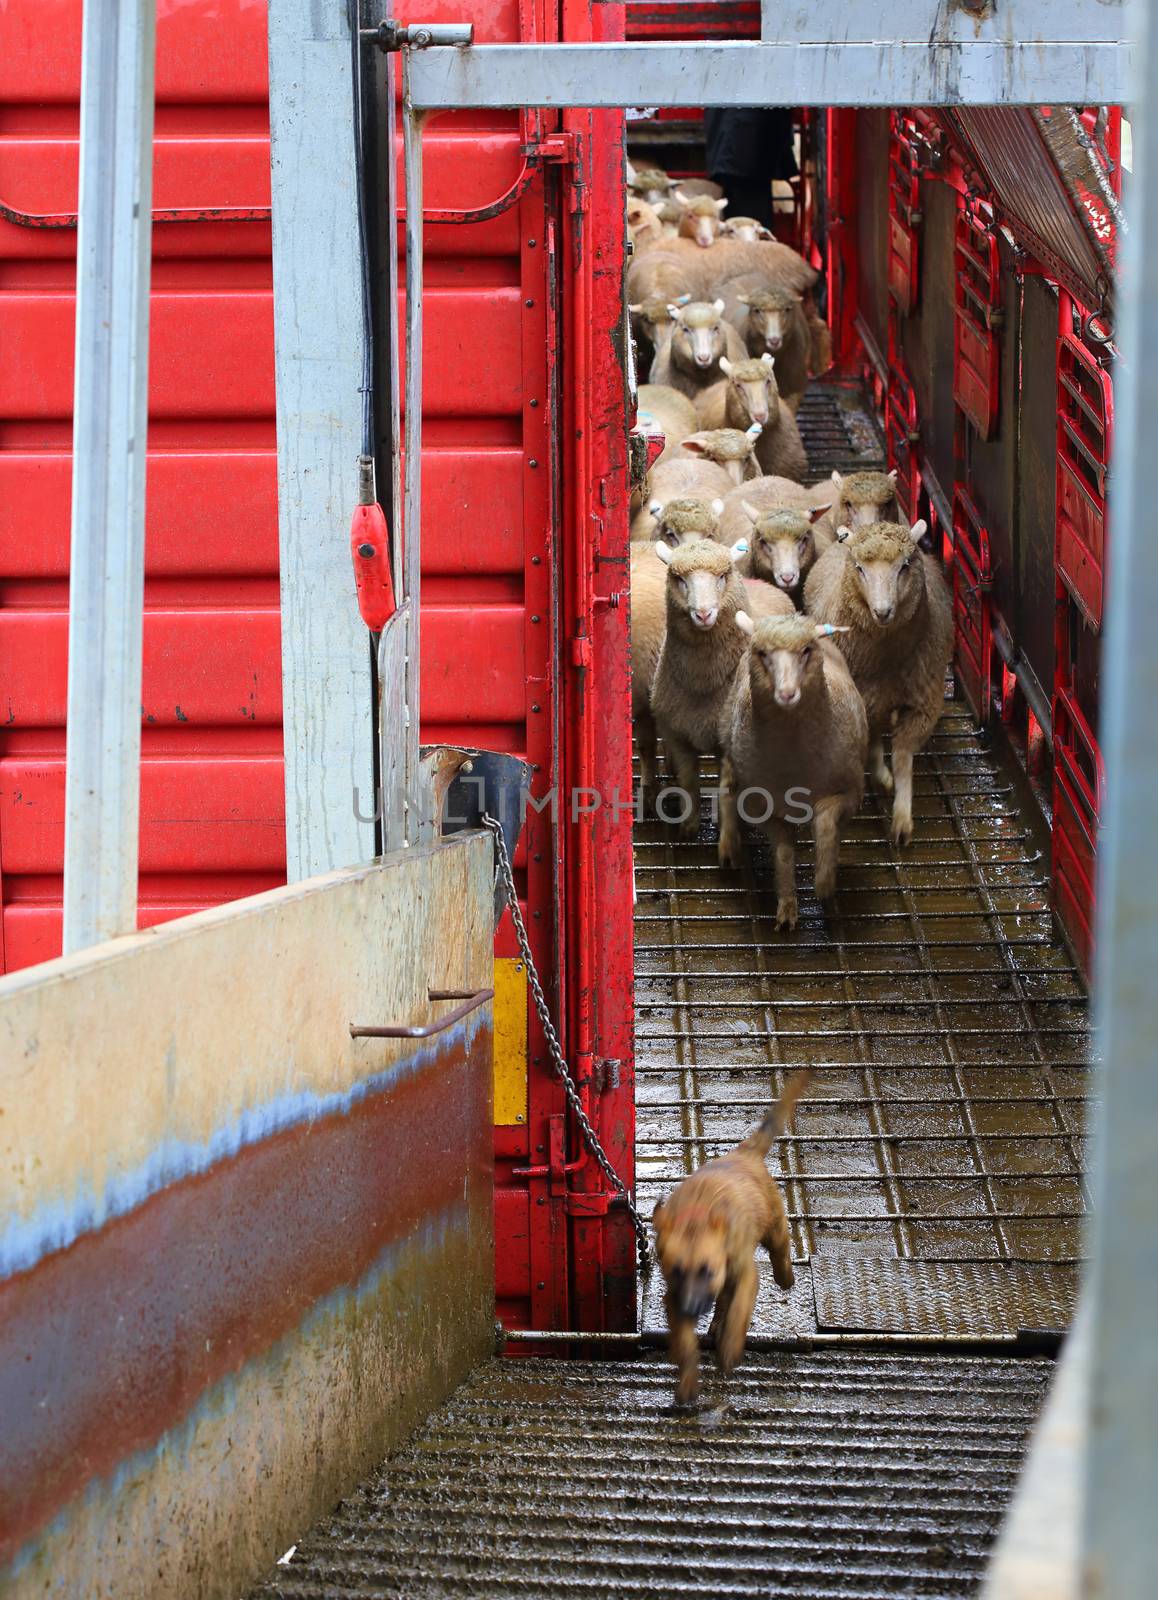 Sheep being offloaded livestock truck by lovleah